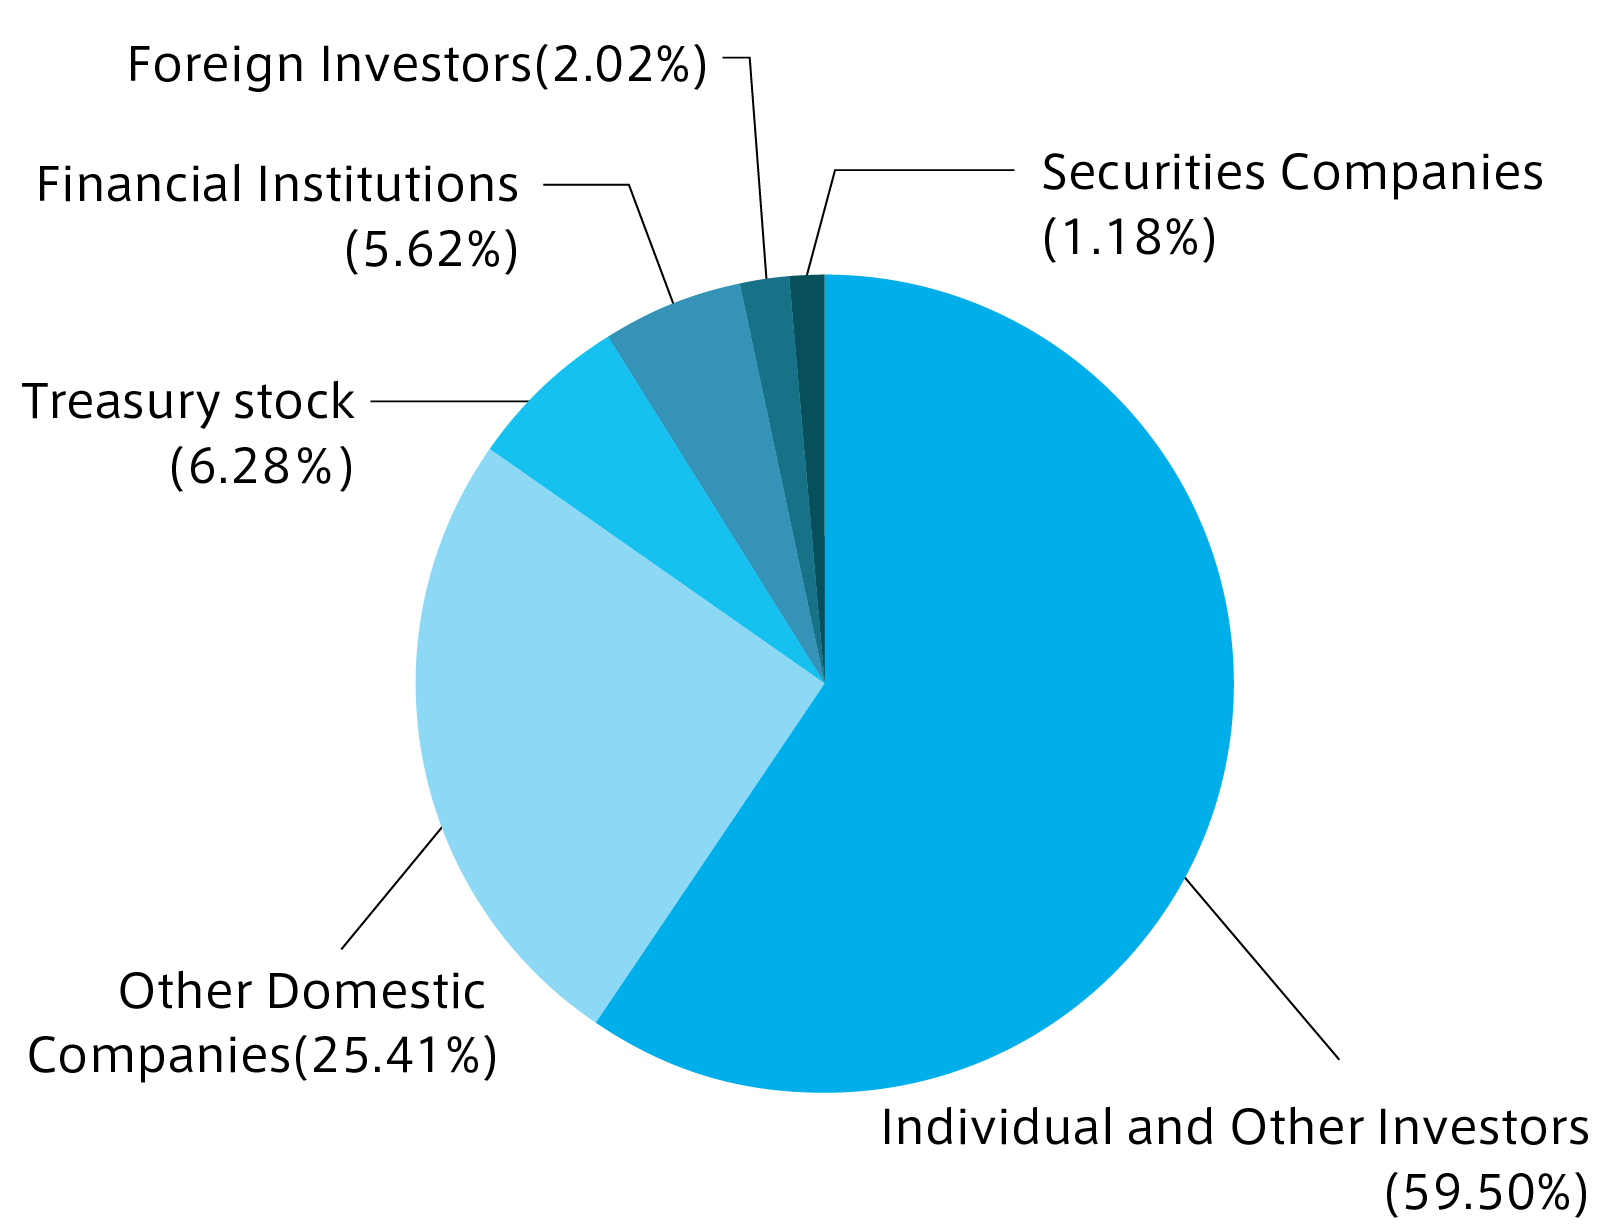 Composition of Shareholders